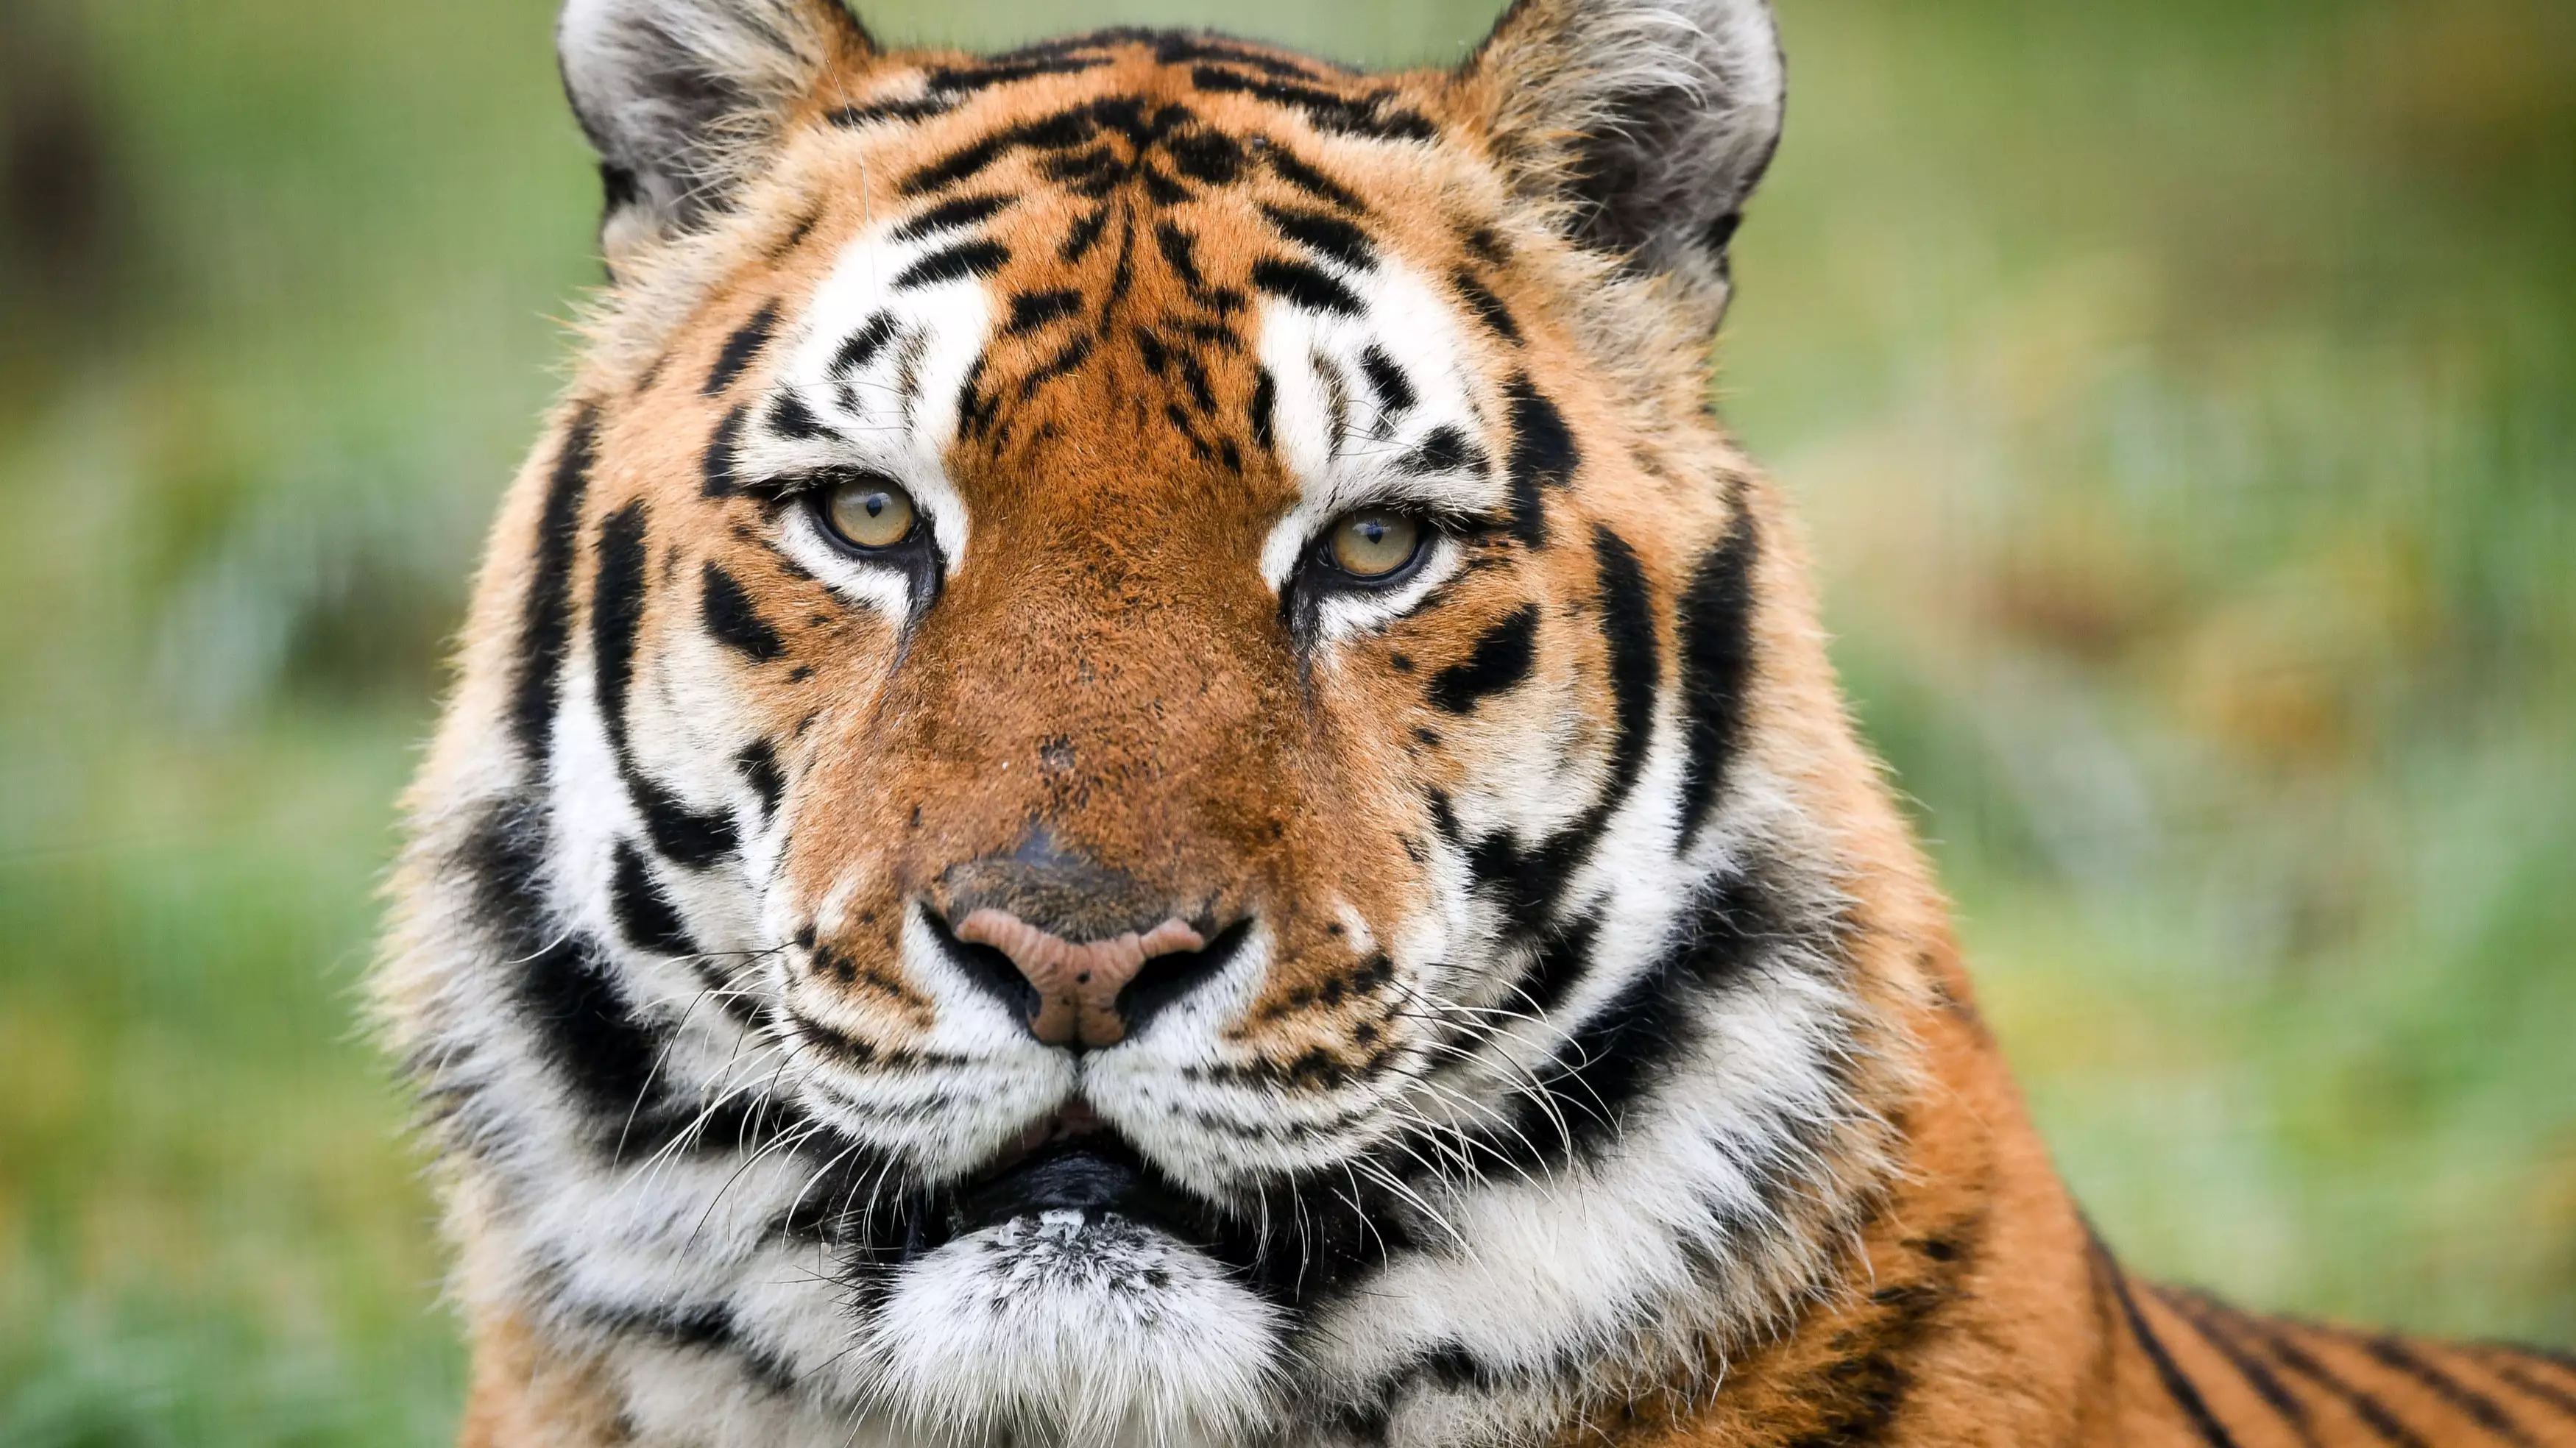 Poacher Thought To Have Killed 70 Tigers Has Been Caught By Police